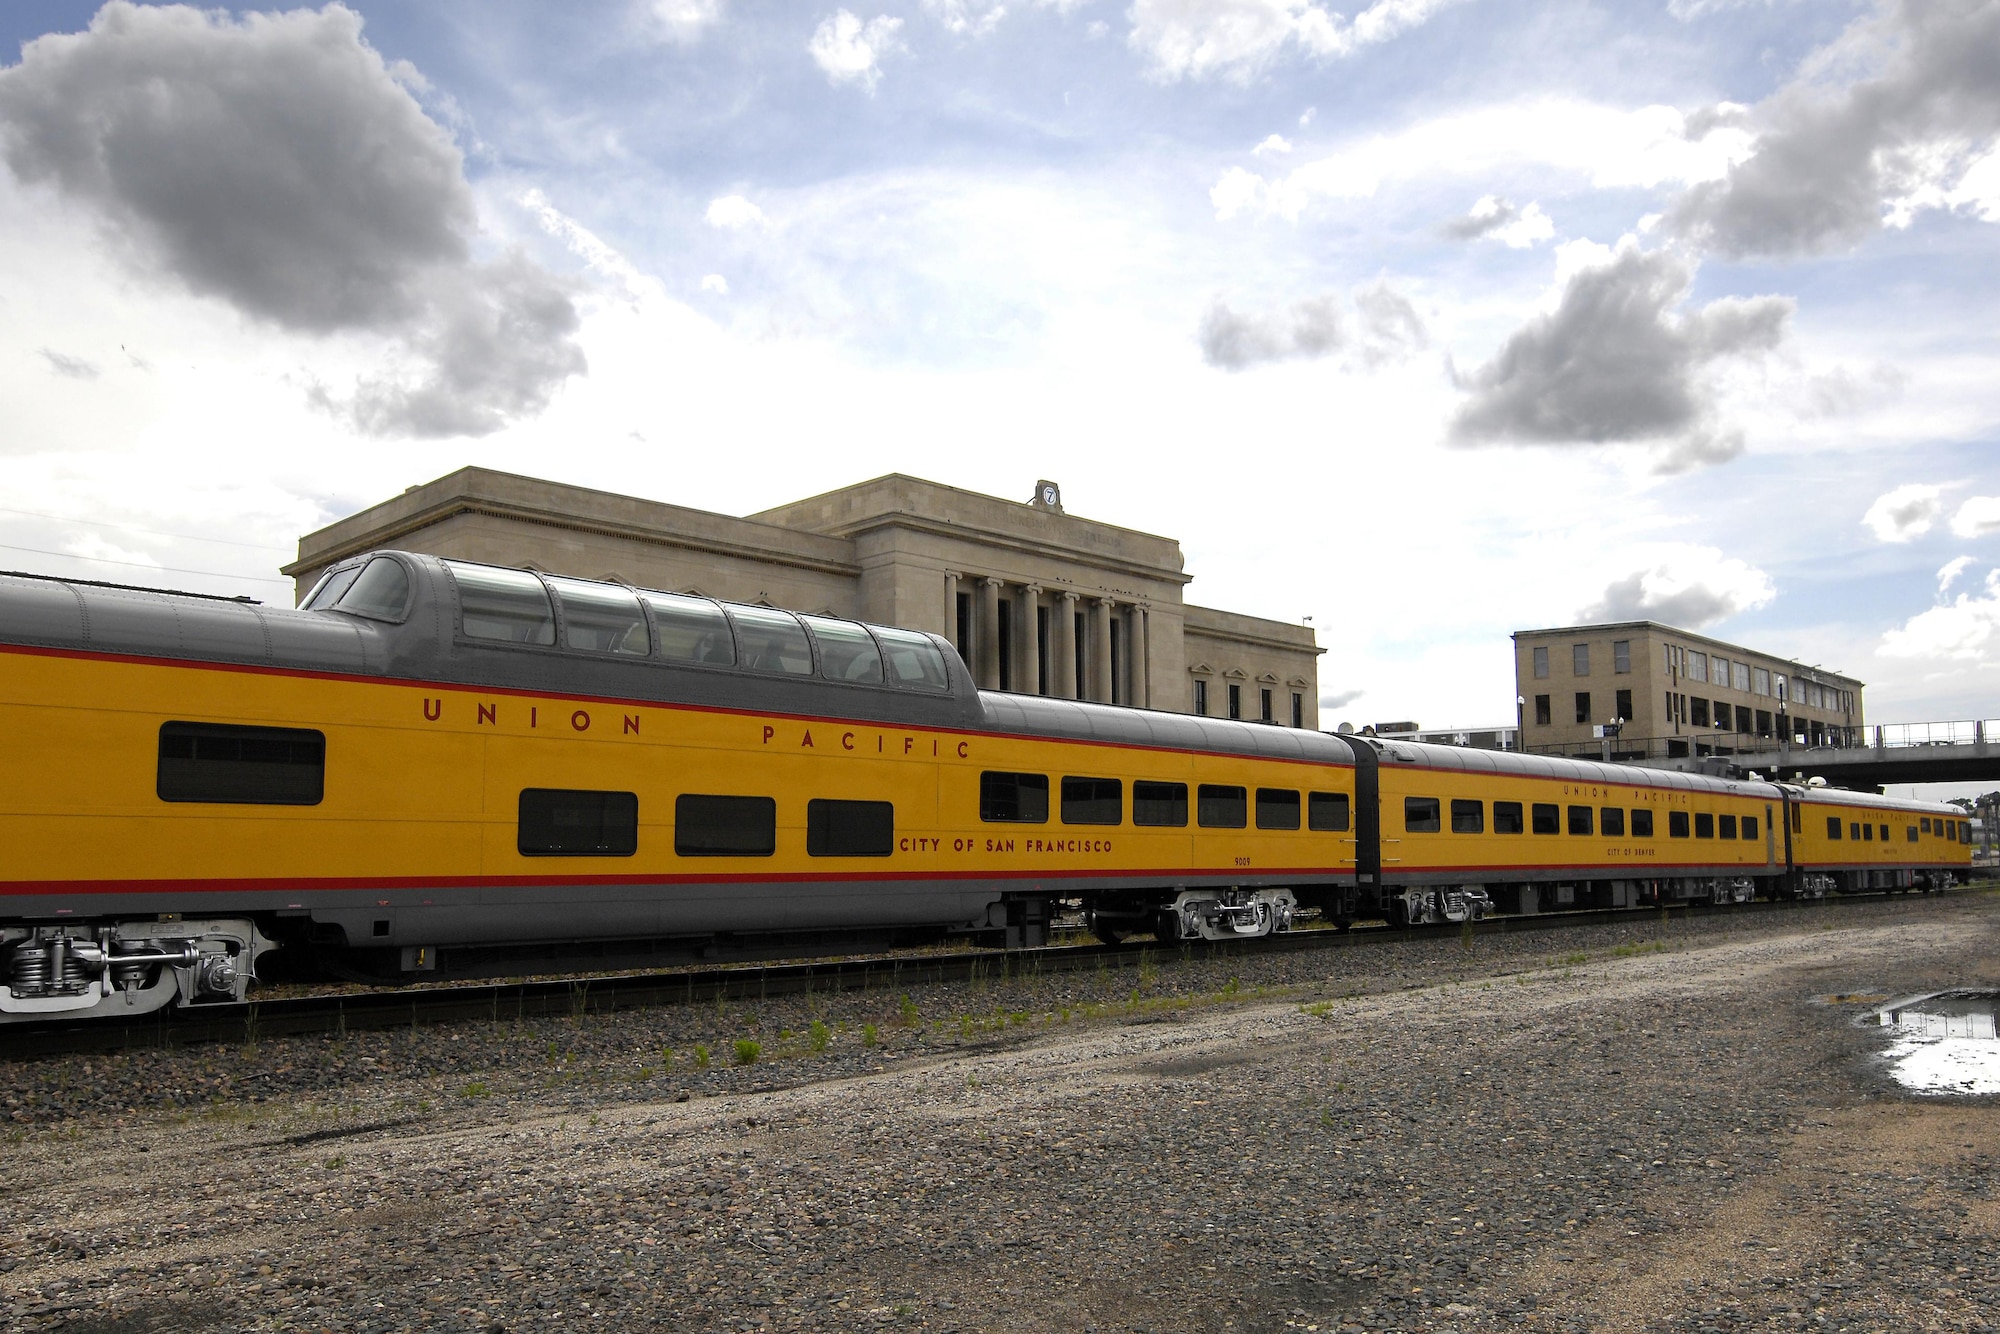 The Union Pacific's historical Western Heritage Fleet of railcars sits on the tracks after returning from a tip to Grand Island, Neb. May 27. Members of Team Offutt were given a day-long train ride where they learned about UP and the company's mission. (U.S. Air Force photo by Delanie Stafford)